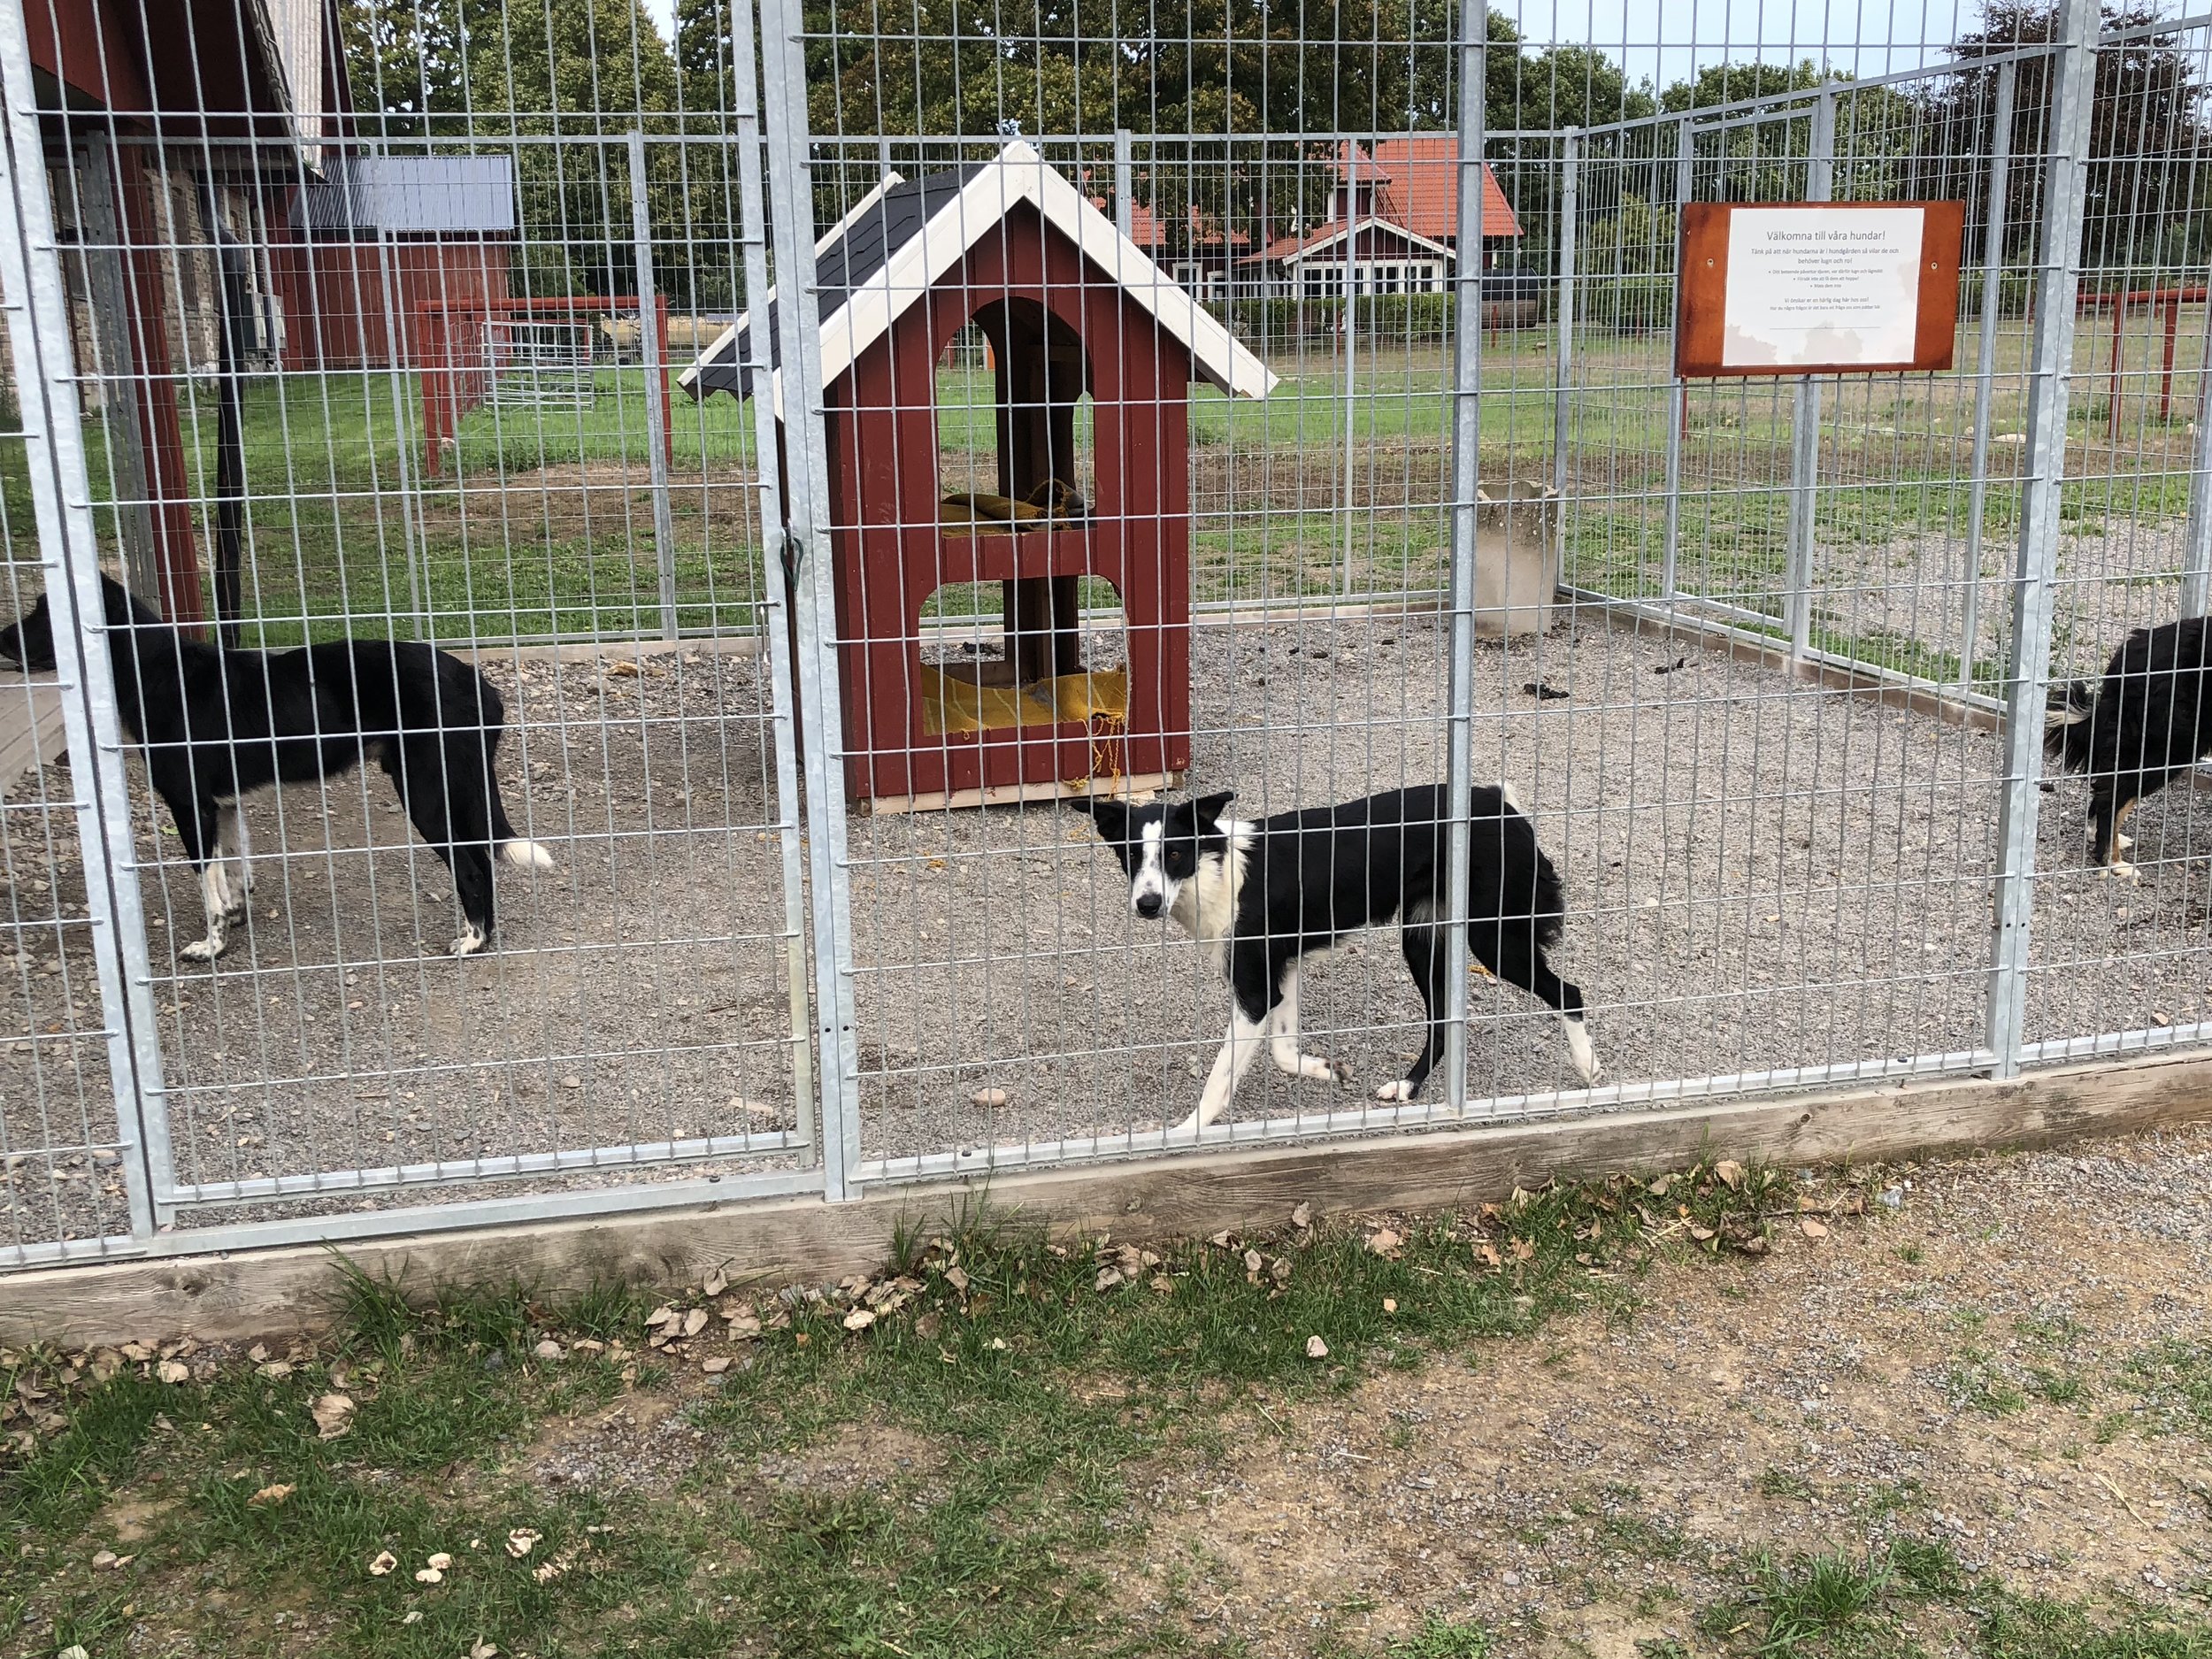 Probably the coolest thing here was the border collies, whom we saw out in the fields, herding the sheep